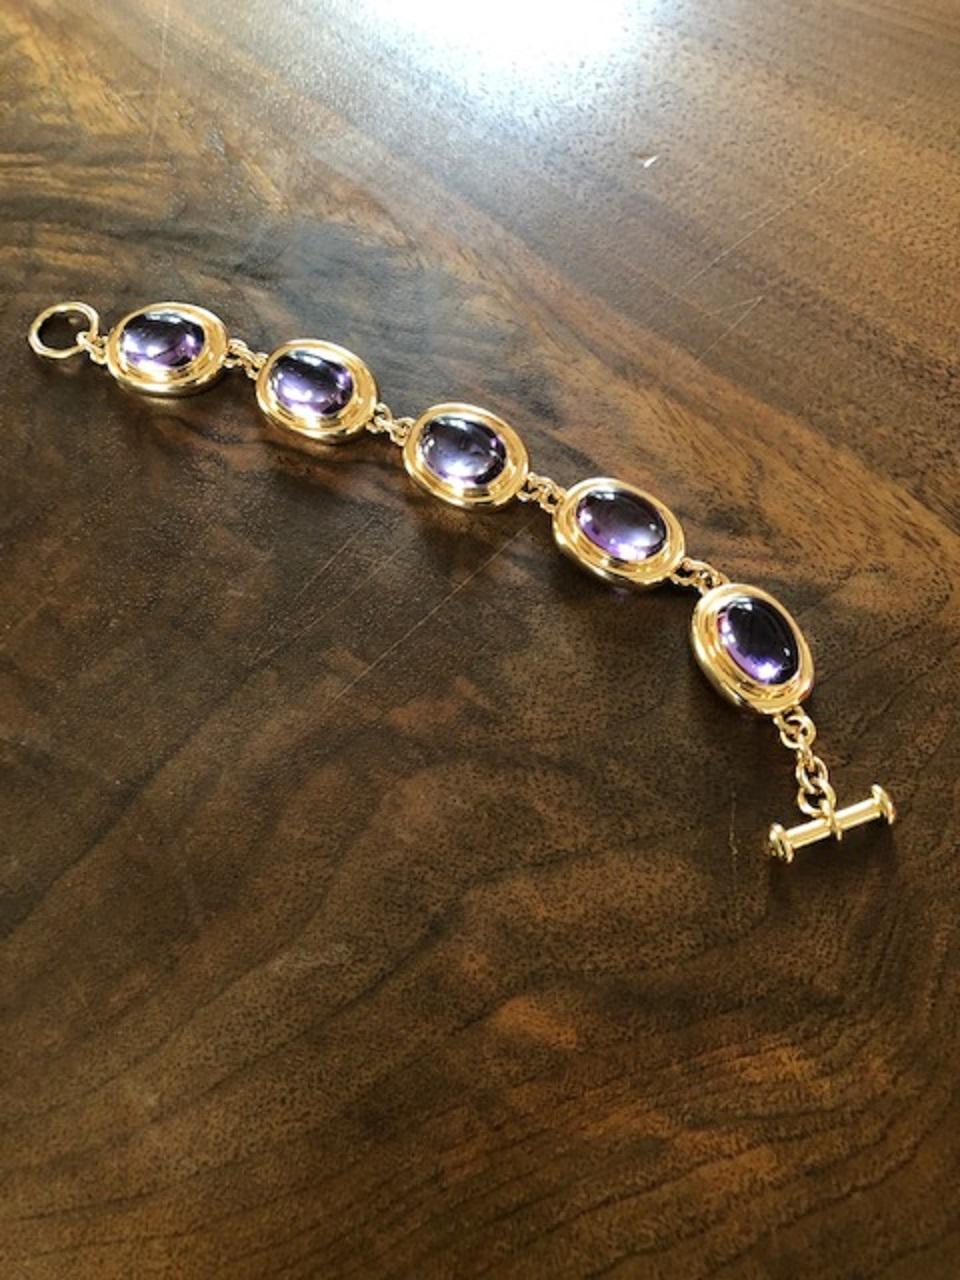 Precious basics bracelet with 5 amethysts of 43.13 ct. set in 18 kt rose gold. This one of a kind piece is handmade in our own workshop in Hamburg, Germany and designed by Colleen B. Rosenblat